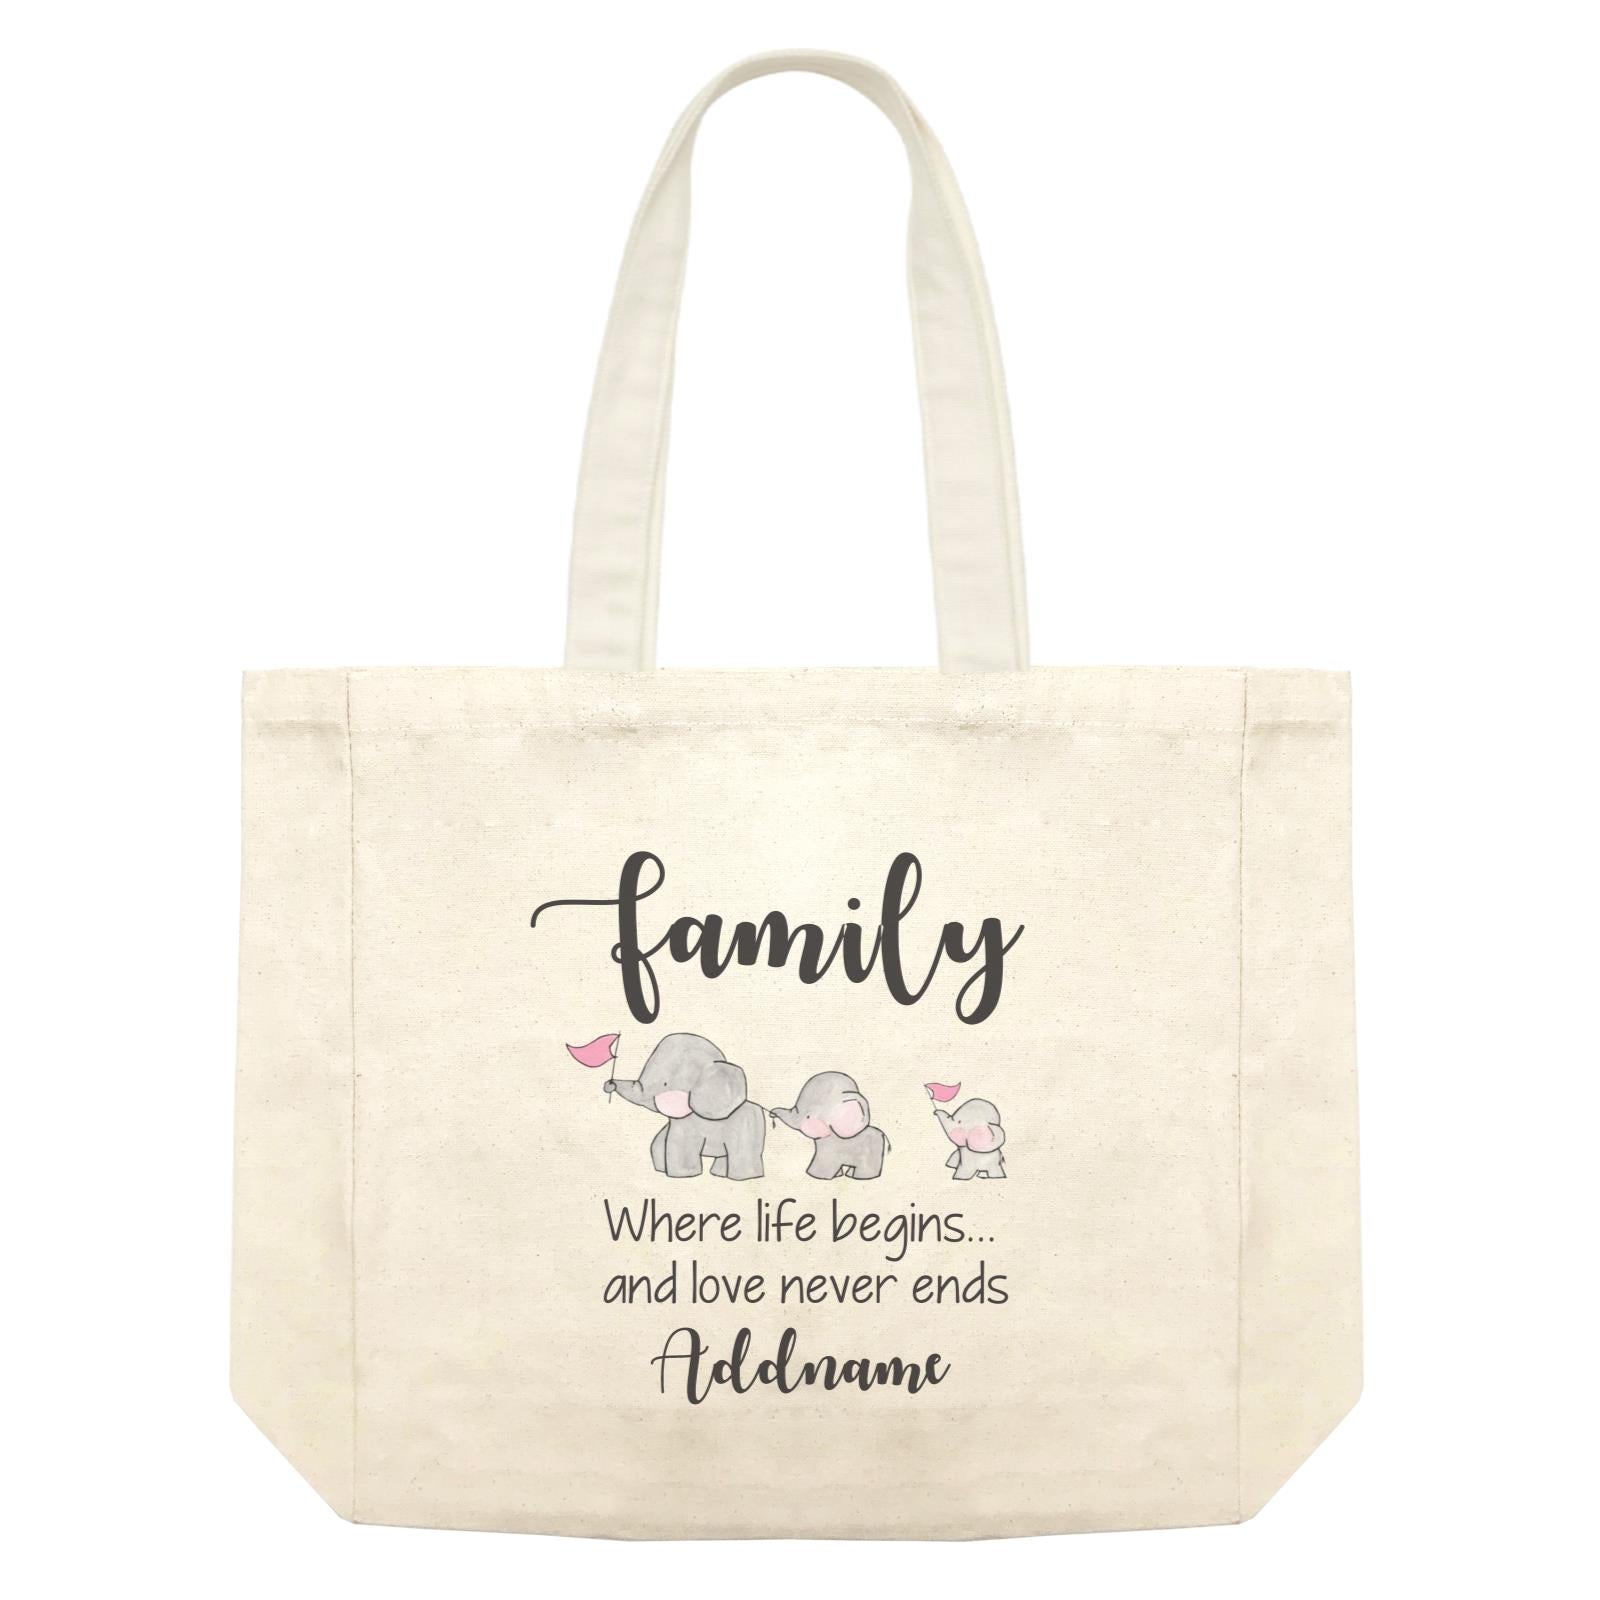 Family Is Everythings Quotes Family Where Life Begins And Love Never Ends Addname Shopping Bag